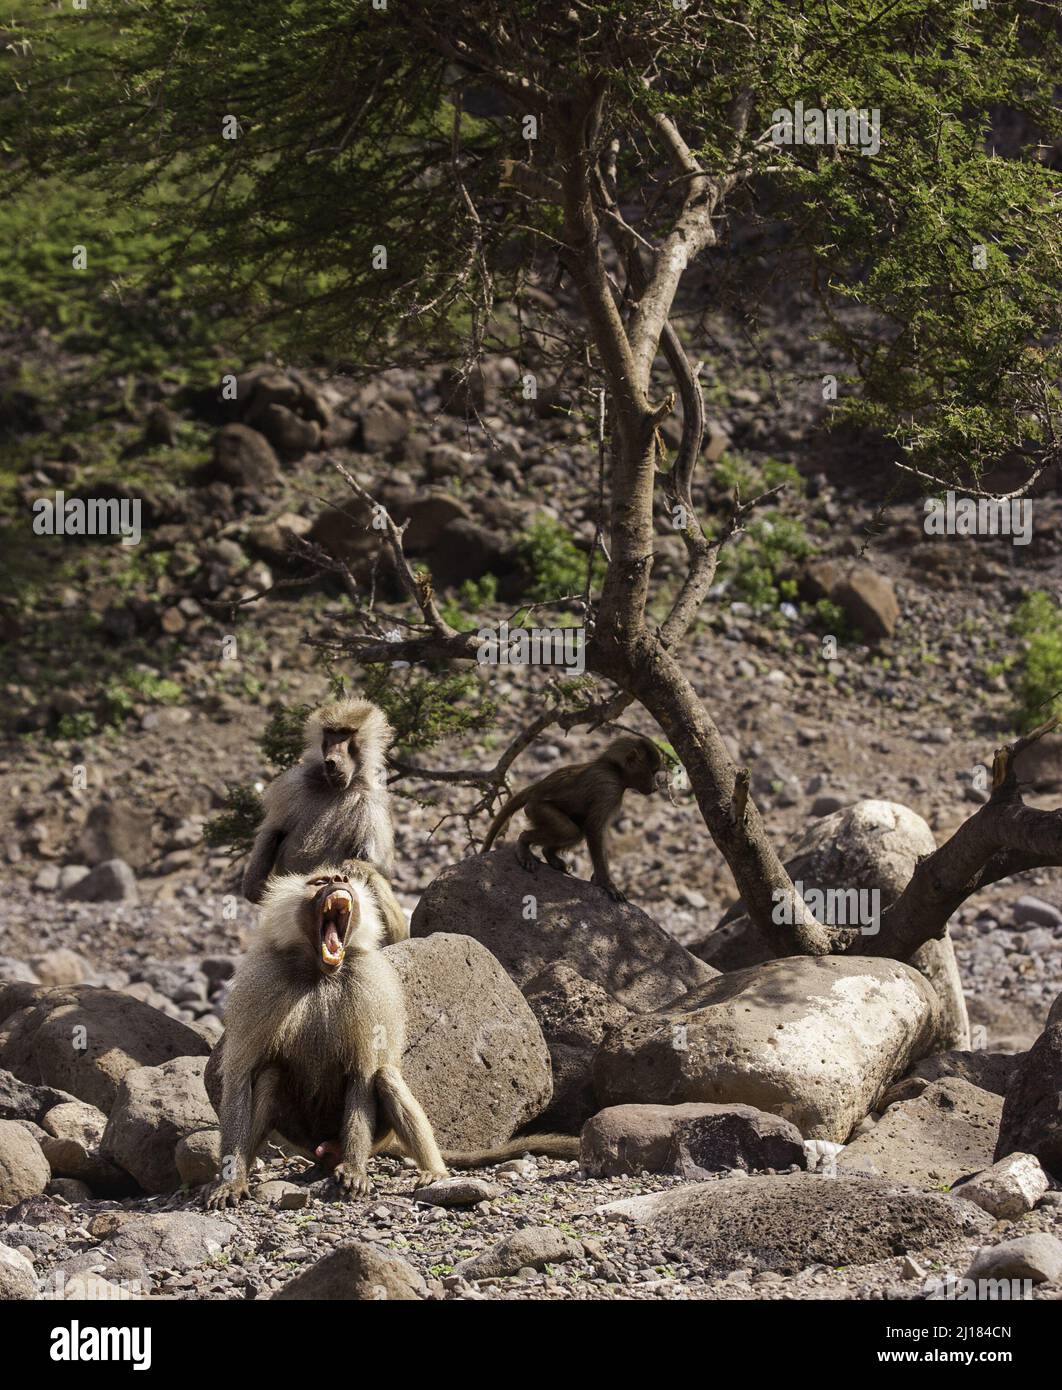 Wild baboon shouting out loud 'don't mess with me' in Djibouti, East Africa, Horn of Africa Stock Photo